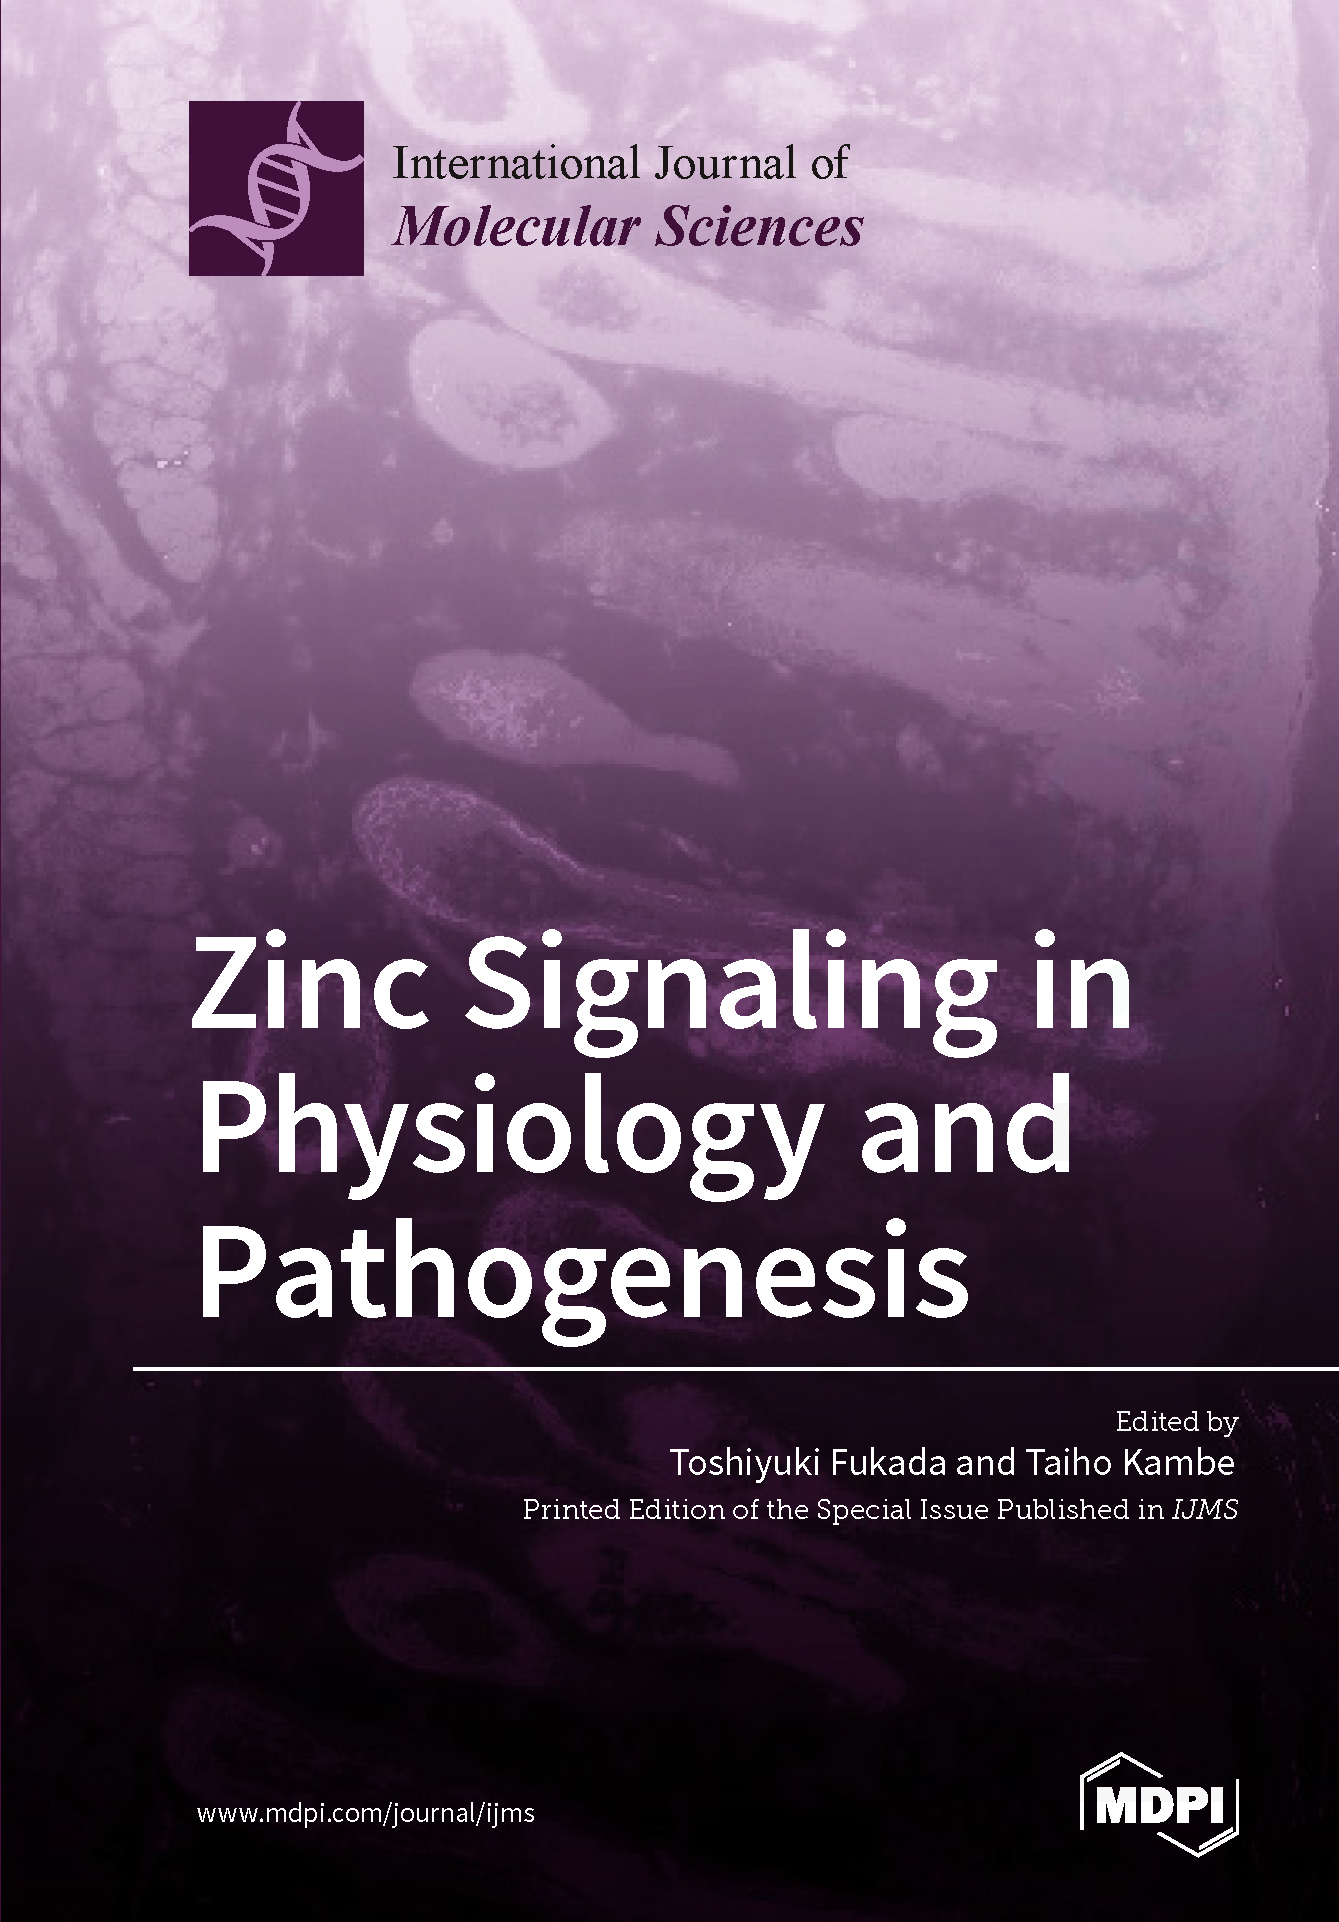 Zinc Signaling in Physiology and Pathogenesis